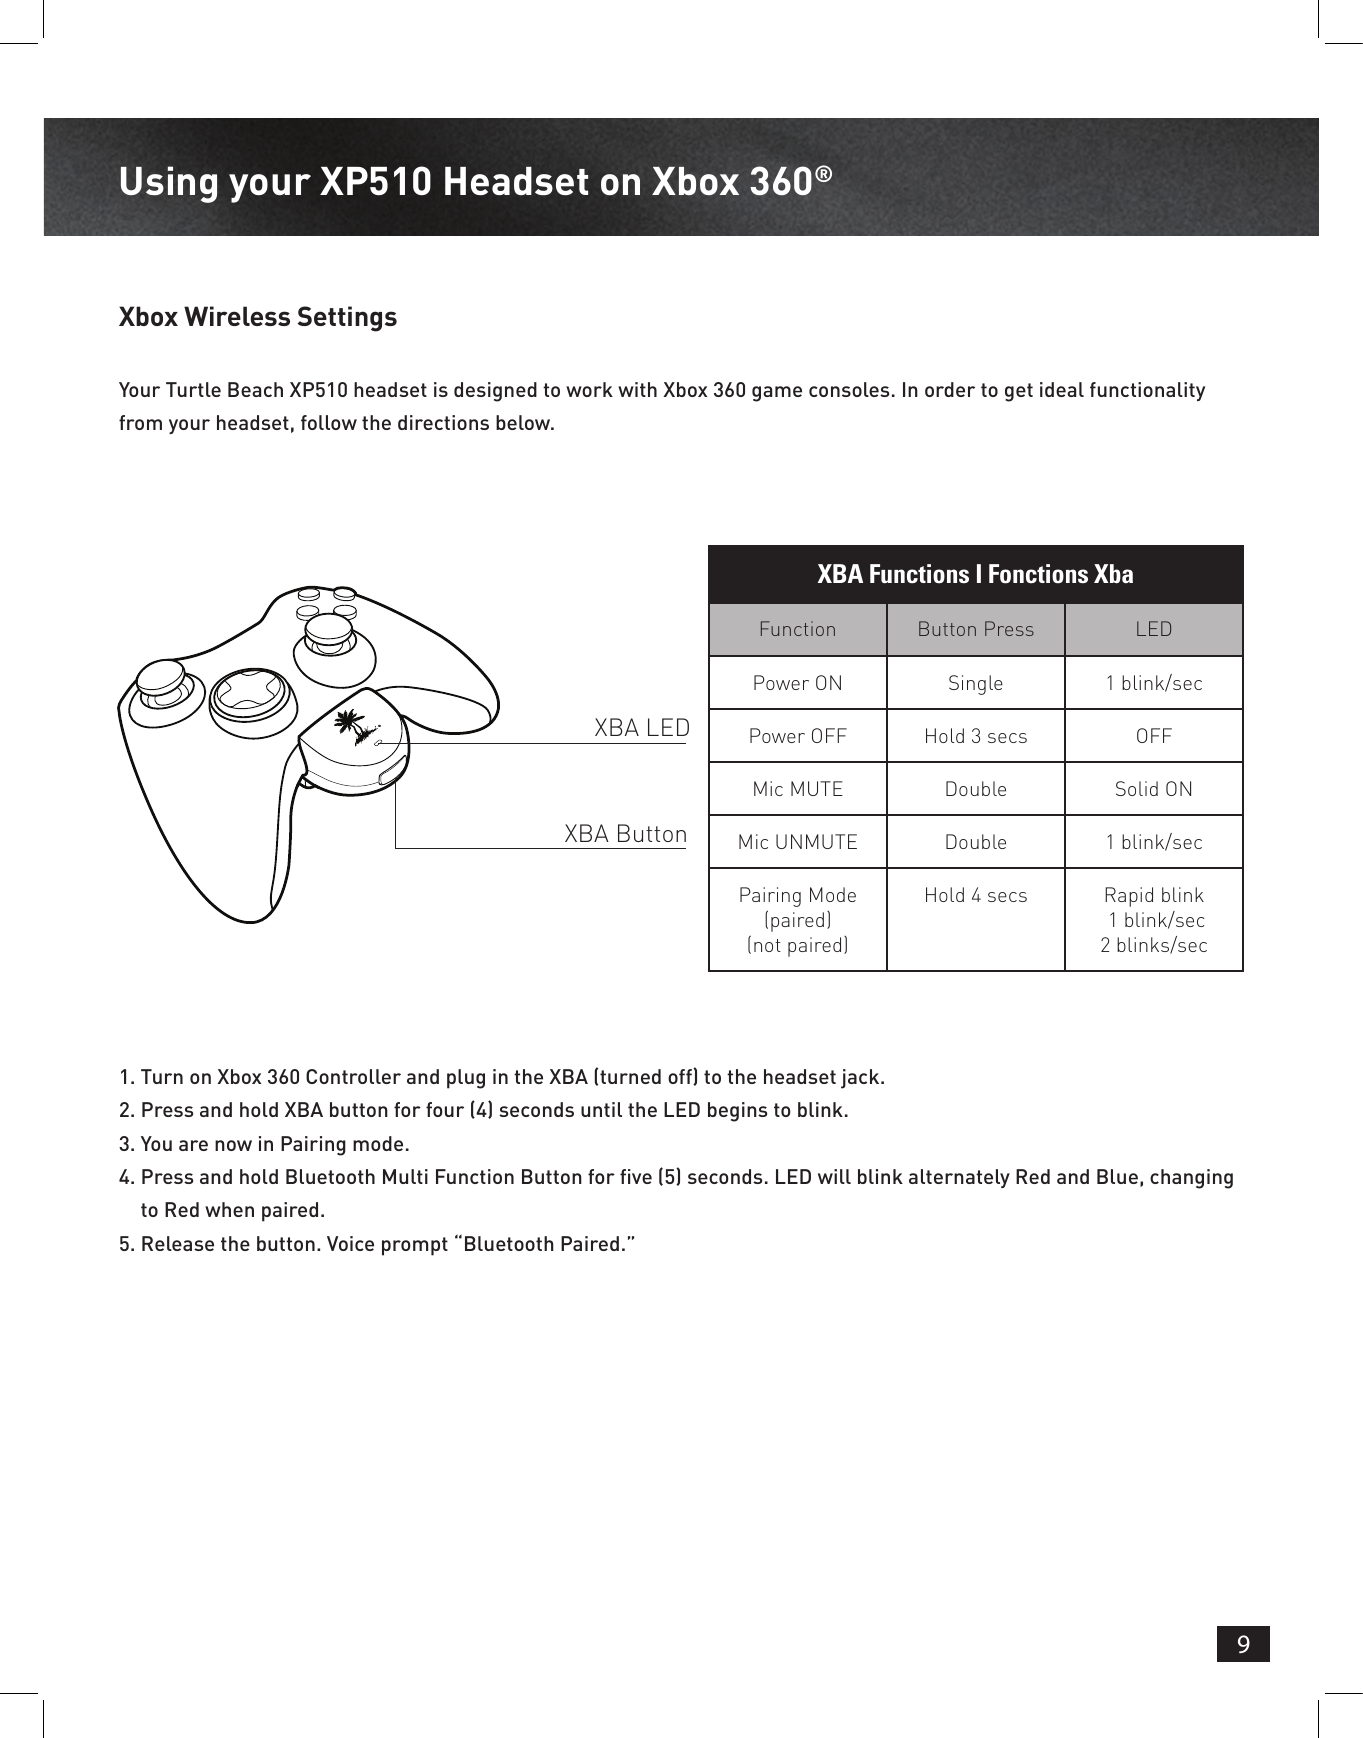 9Using your XP510 Headset on Xbox 360®Xbox Wireless SettingsYour Turtle Beach XP510 headset is designed to work with Xbox 360 game consoles. In order to get ideal functionality from your headset, follow the directions below.1.  Turn on Xbox 360 Controller and plug in the XBA (turned off) to the headset jack.2.  Press and hold XBA button for four (4) seconds until the LED begins to blink.3.  You are now in Pairing mode.4.  Press and hold Bluetooth Multi Function Button for ve (5) seconds. LED will blink alternately Red and Blue, changing to Red when paired. 5.  Release the button. Voice prompt “Bluetooth Paired.”XBA LEDXBA ButtonXBA Functions I Fonctions XbaFunction Button Press LEDPower ON Single 1 blink/secPower OFF Hold 3 secs OFFMic MUTE Double Solid ONMic UNMUTE Double 1 blink/secPairing Mode (paired)(not paired)Hold 4 secs Rapid blink  1 blink/sec 2 blinks/sec